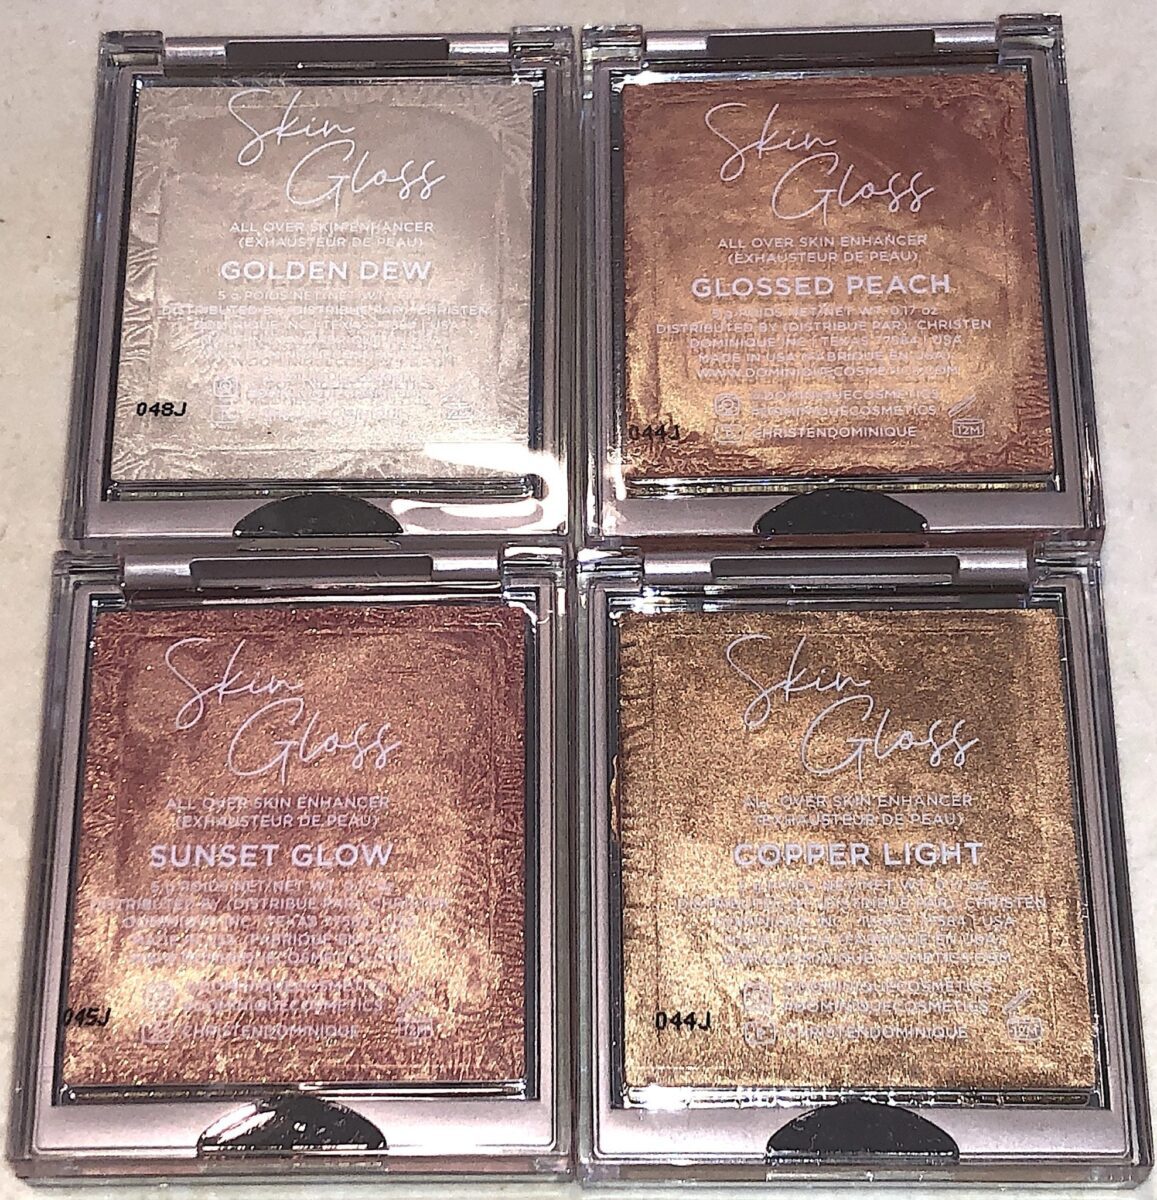 SEE THROUGH BACK OF SKIN GLOSS COMPACTS